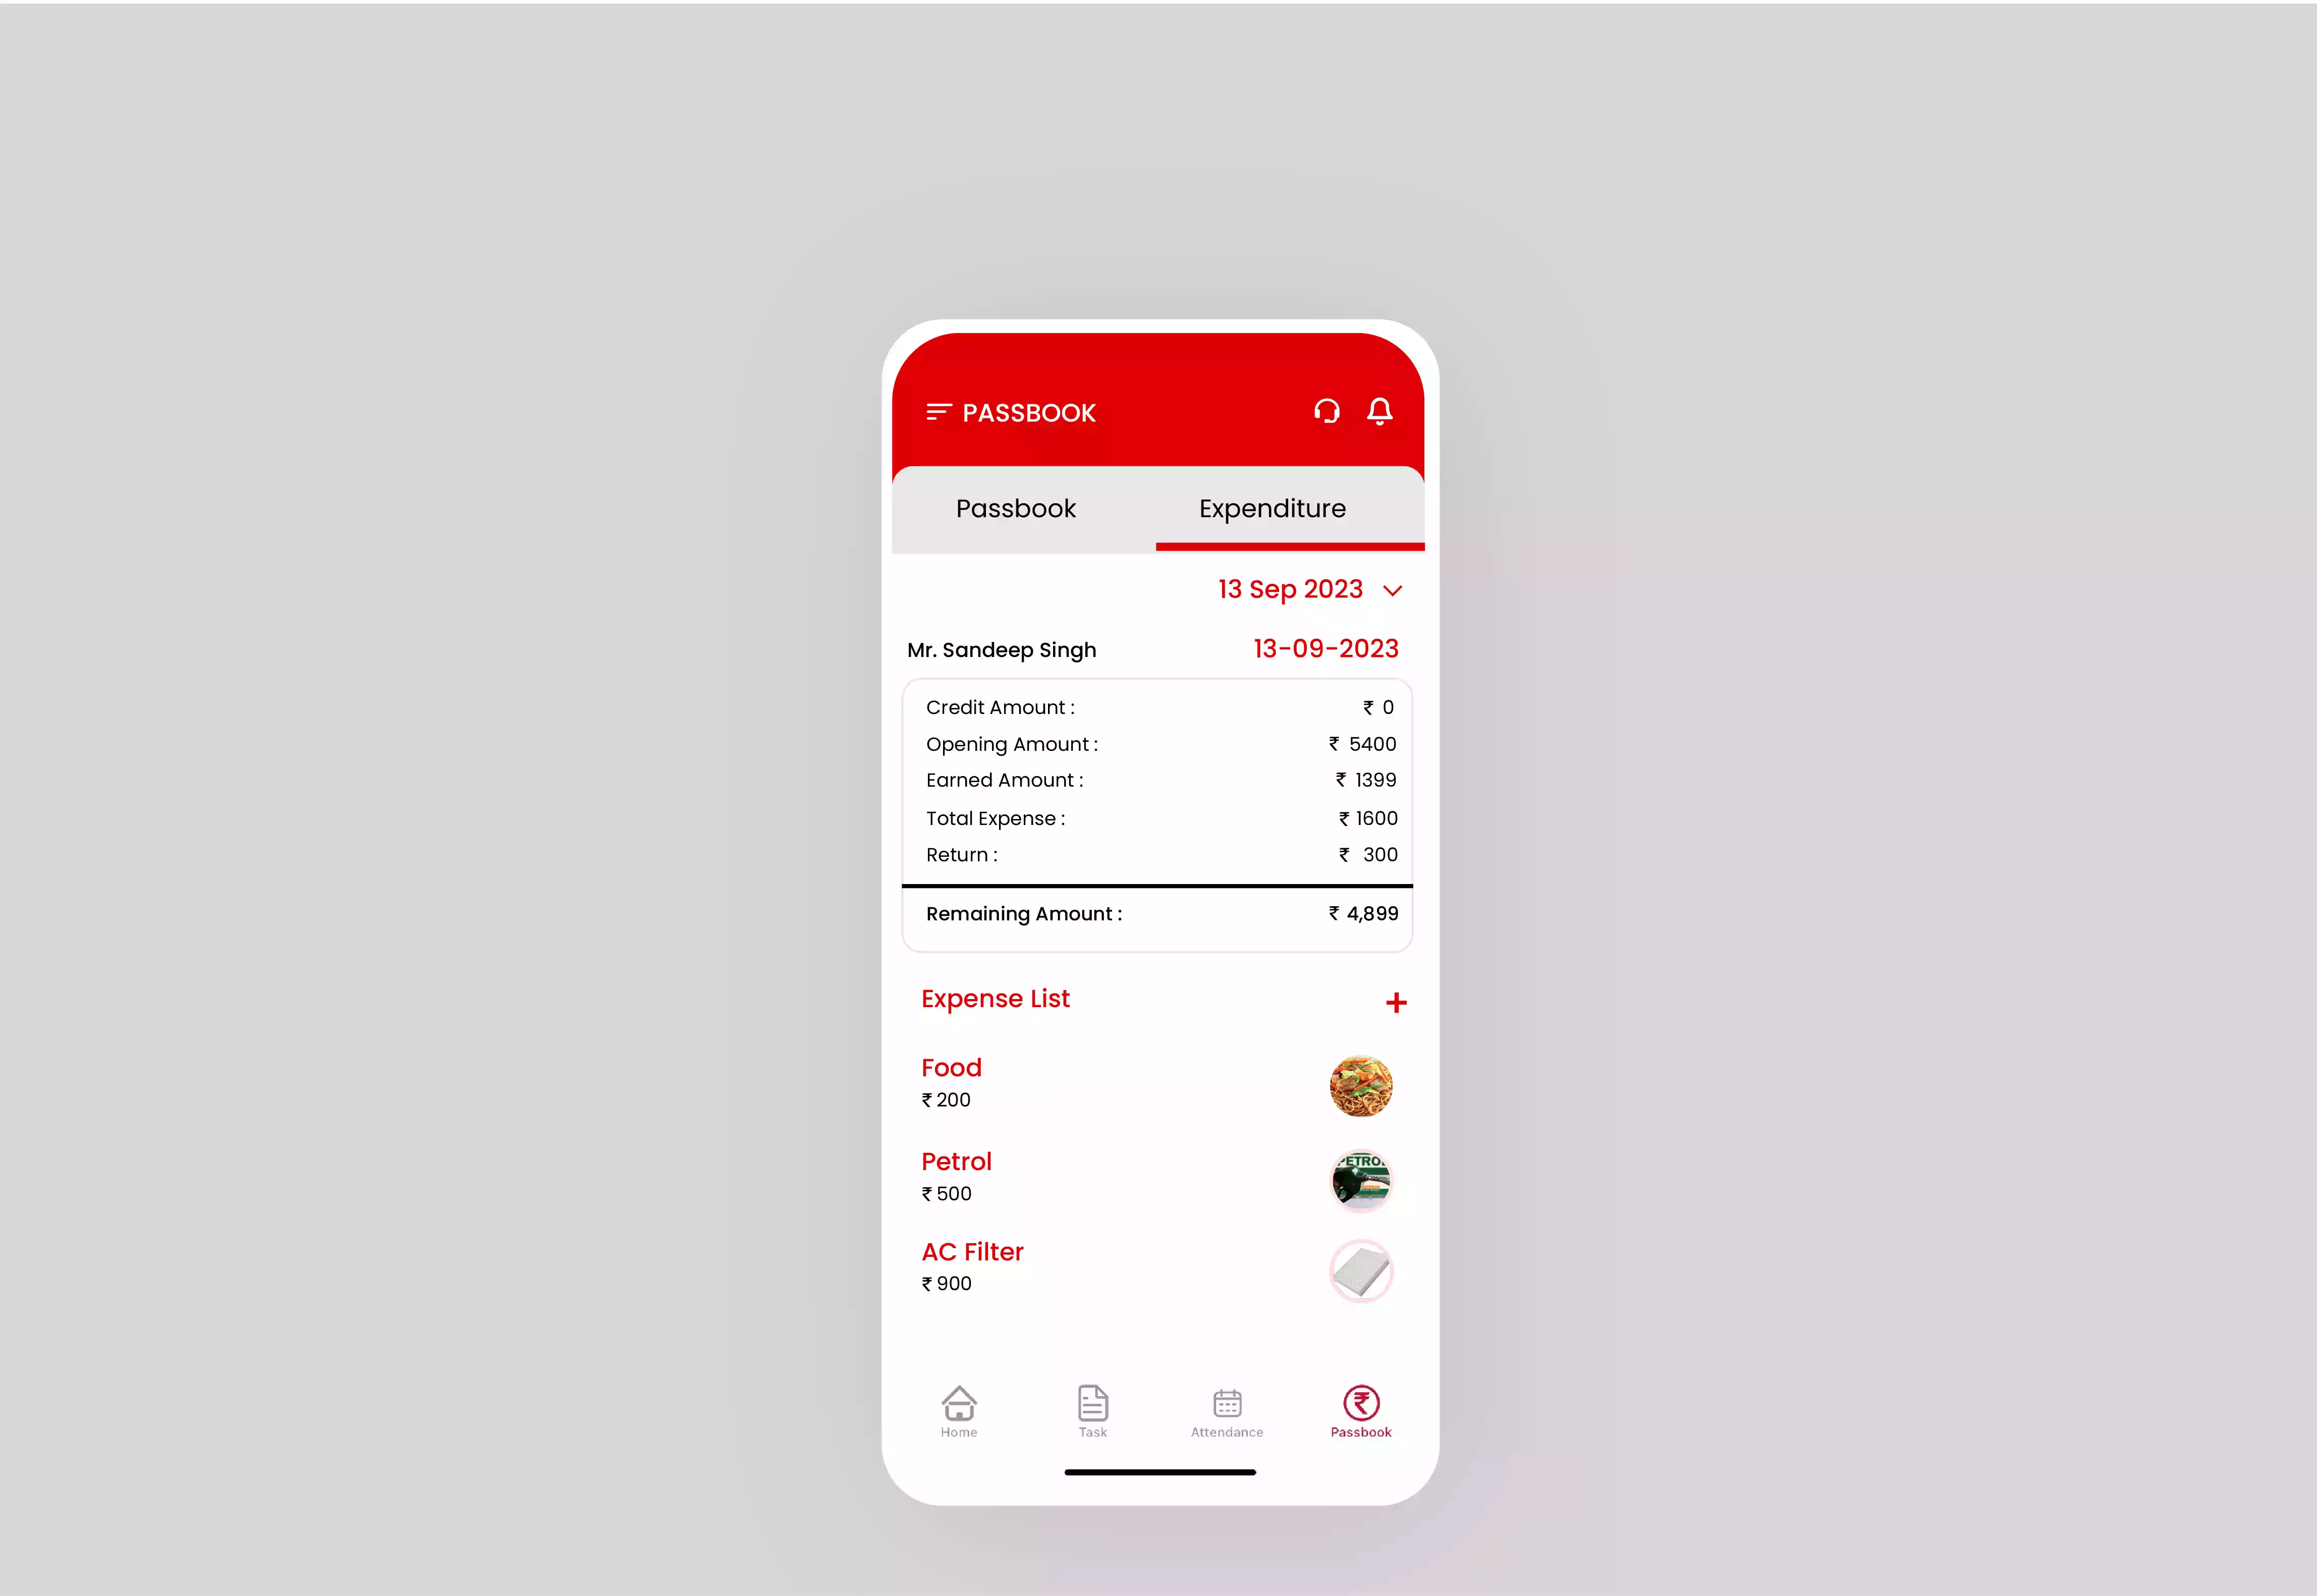 An Image shows a phone with a passbook and expenditure page, listing the technician's name, date, and expense details of the food, petrol and other items.